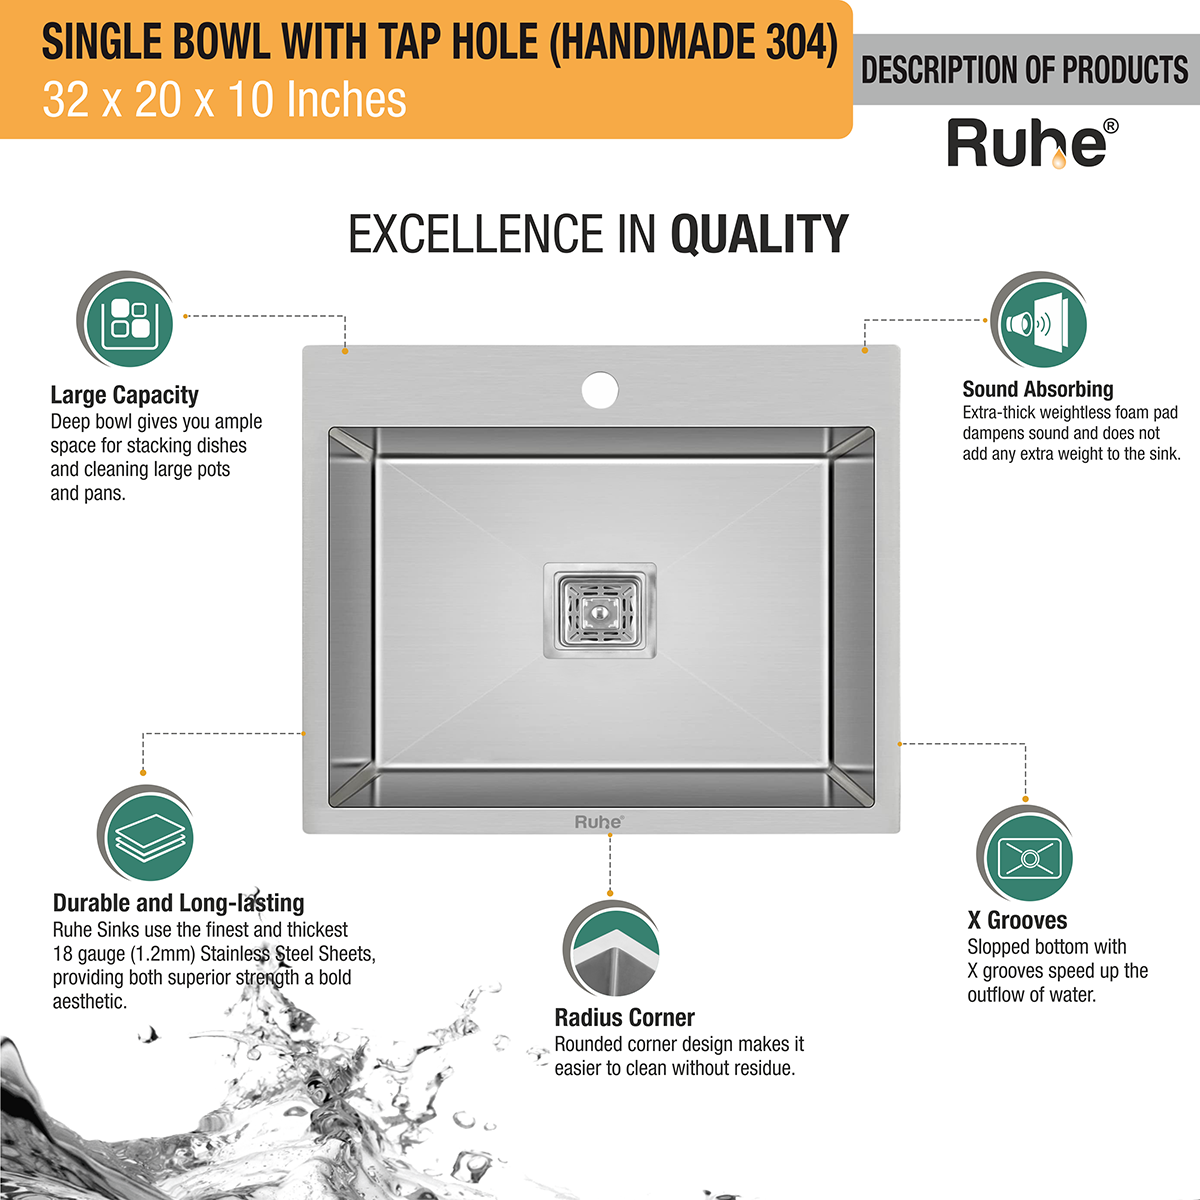 Handmade Single Bowl 304-Grade Kitchen Sink (32 x 20 x 10 Inches) with Tap Hole quality of products